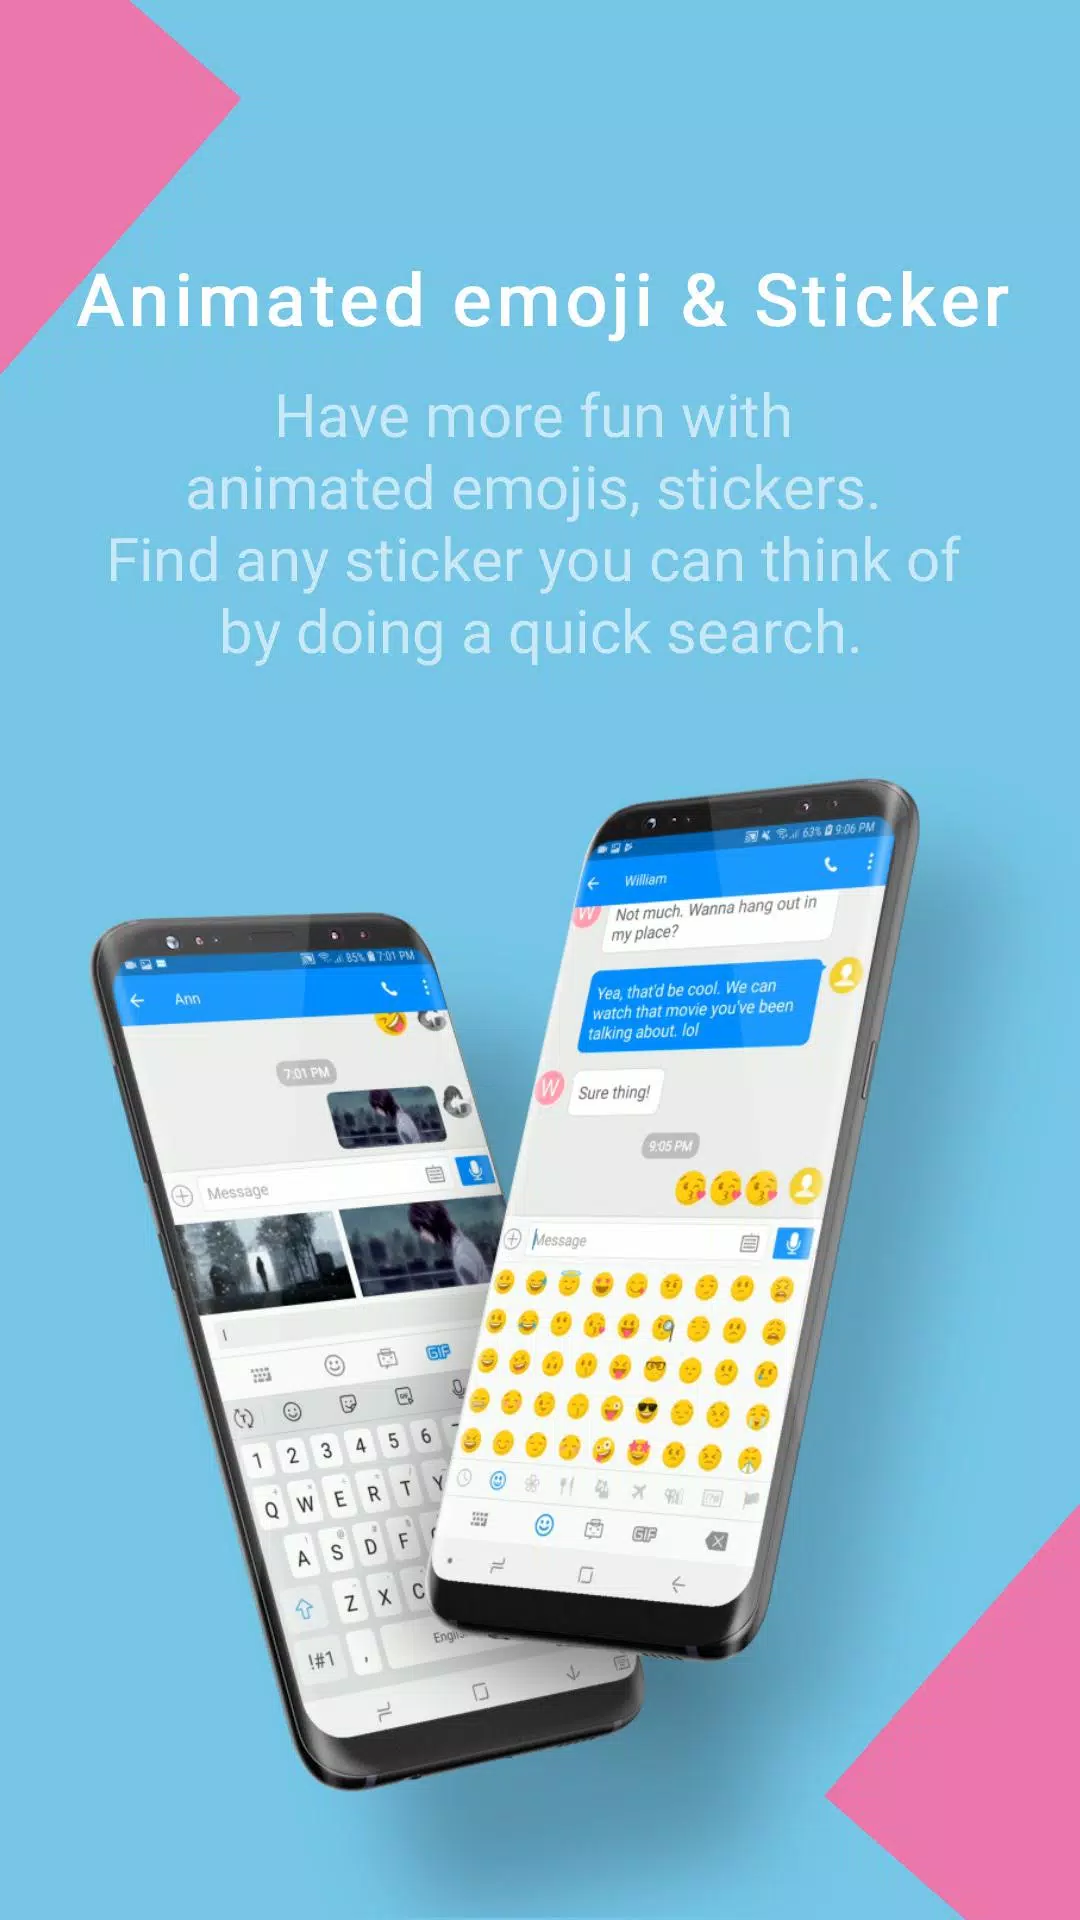 Handcent Next Sms Messenger Apk For Android Download